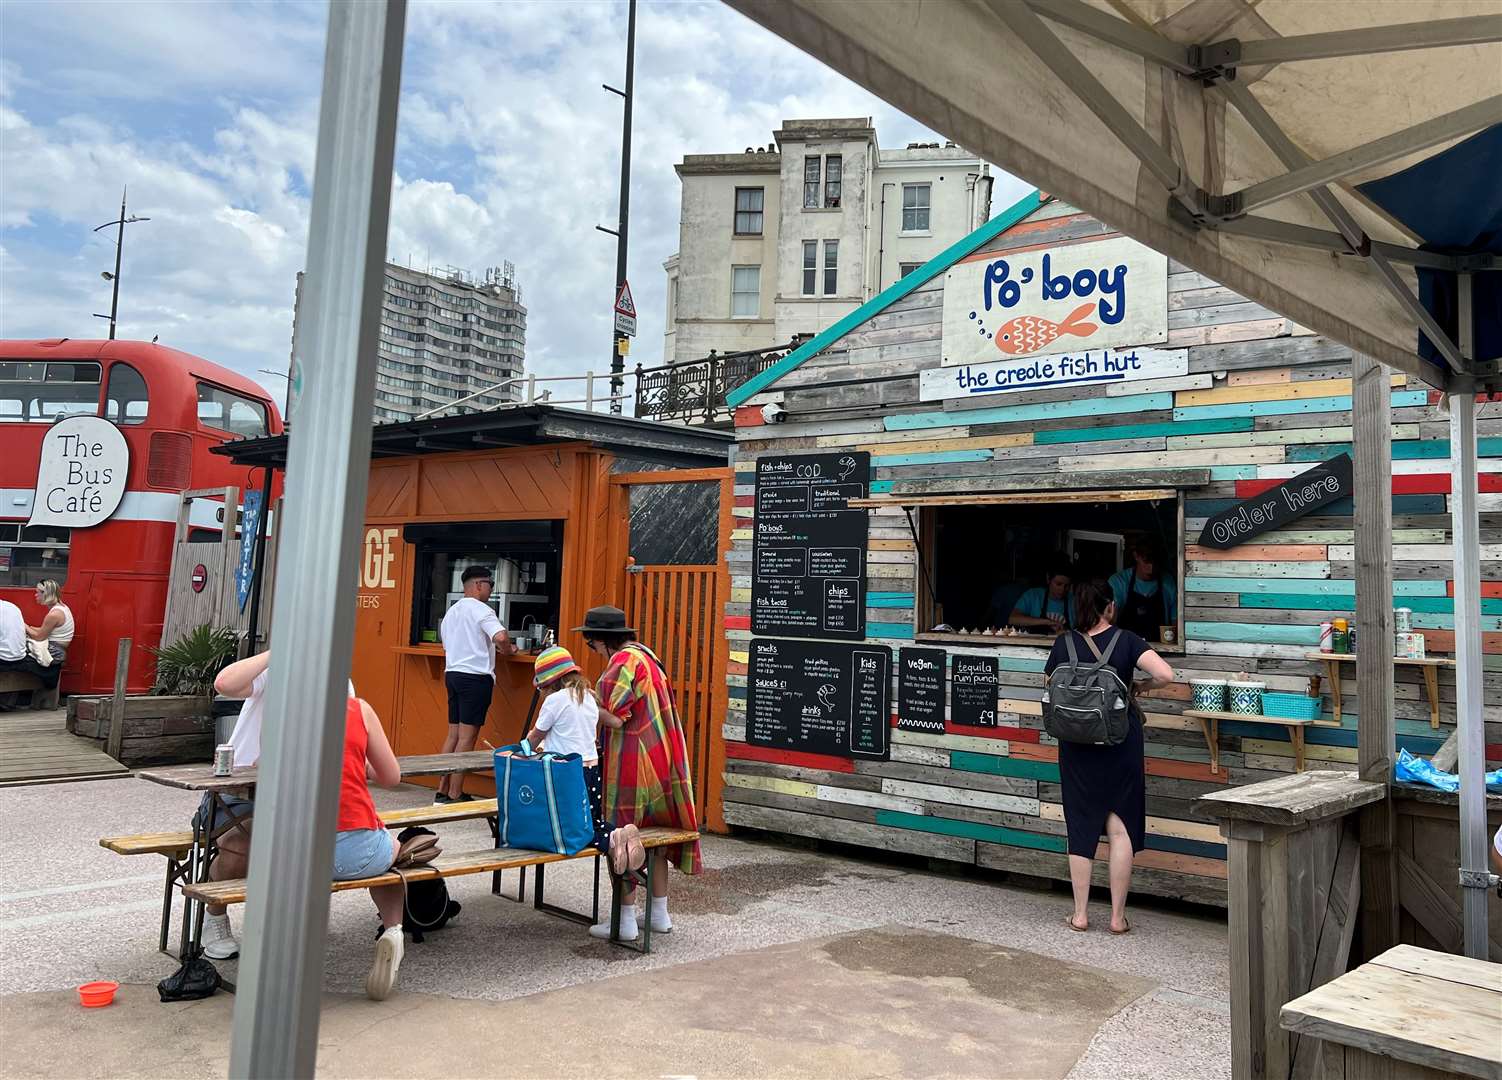 Po'boy - the Creole Fish Hut - is about 10 yards away from The Bus Cafe on Margate seafront